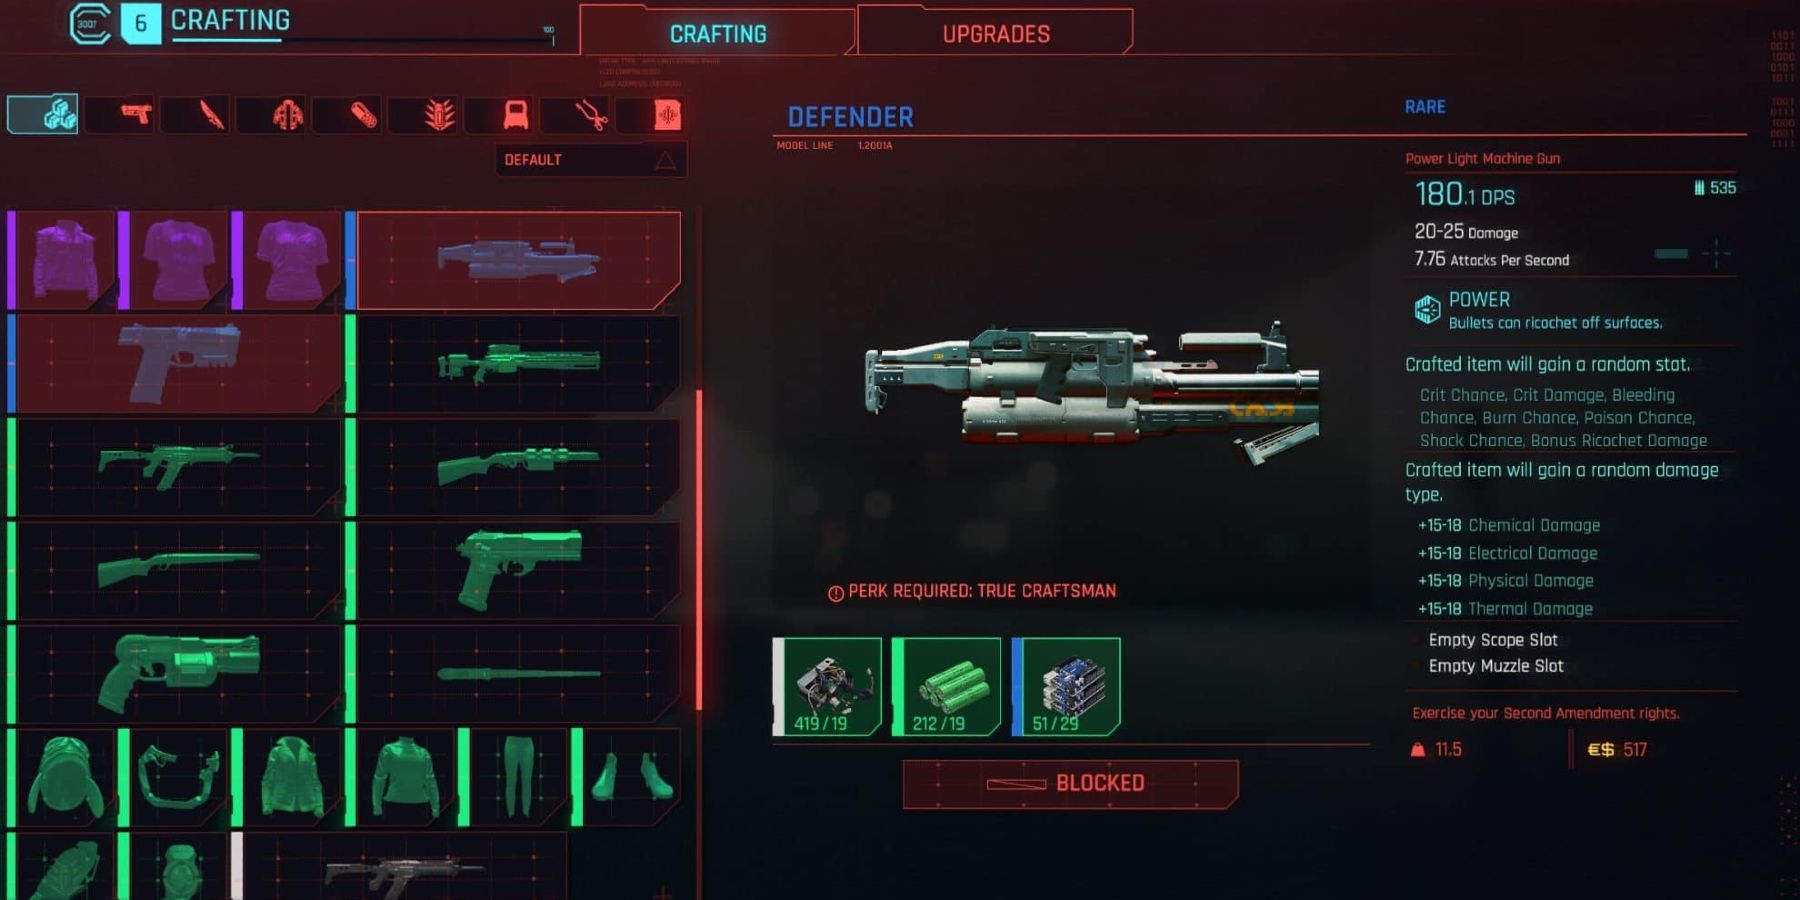 How to Level Crafting in Cyberpunk 2077